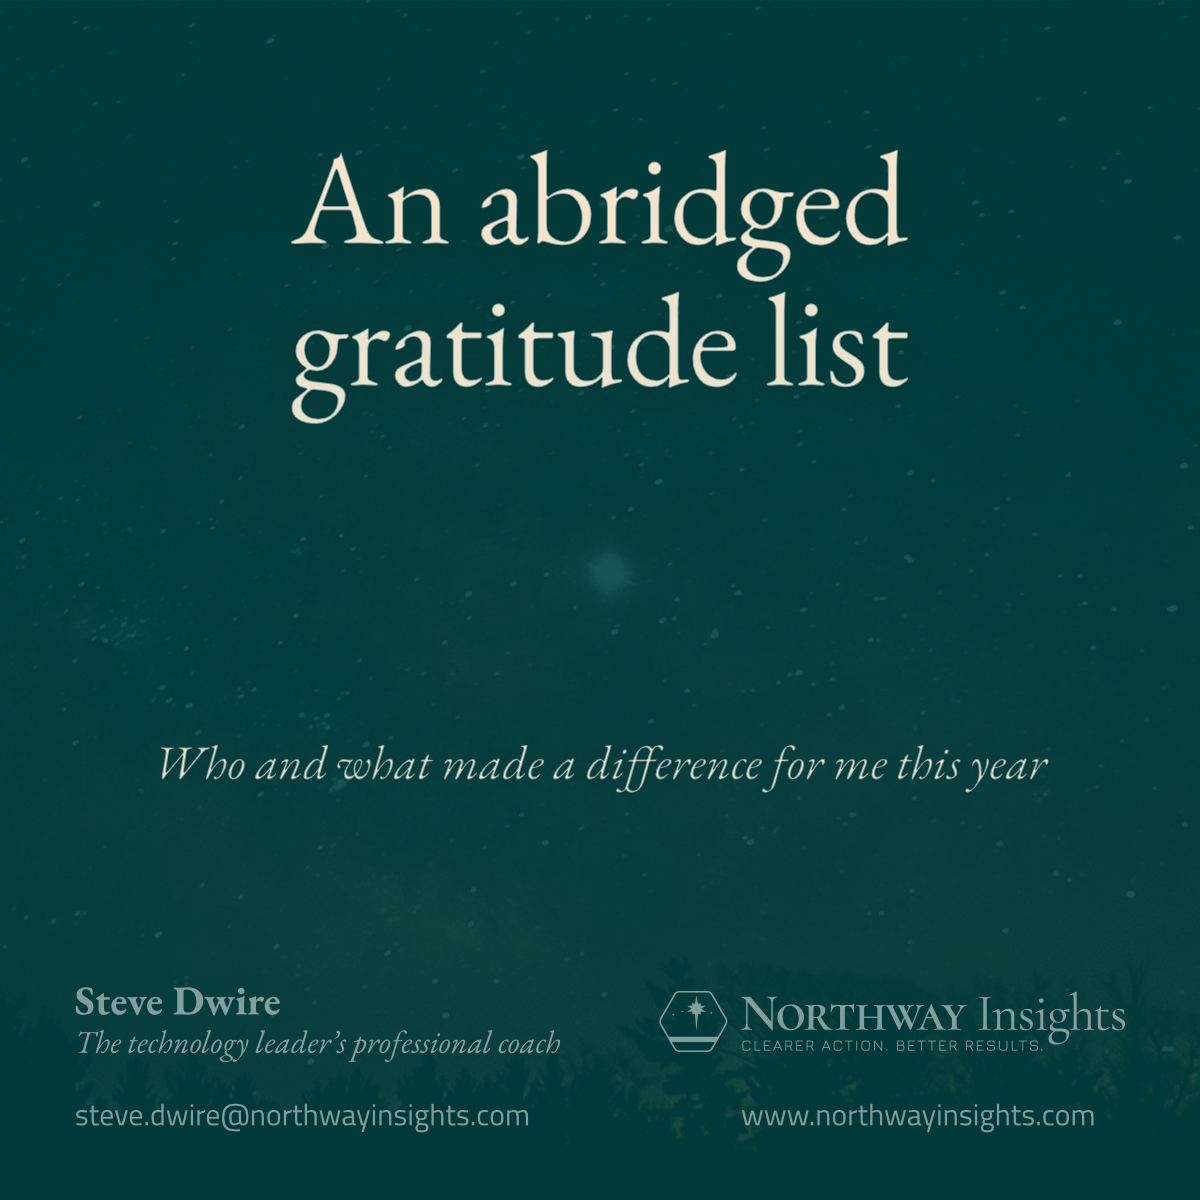 An abridged gratitude list (Who and what made a difference for me this year)